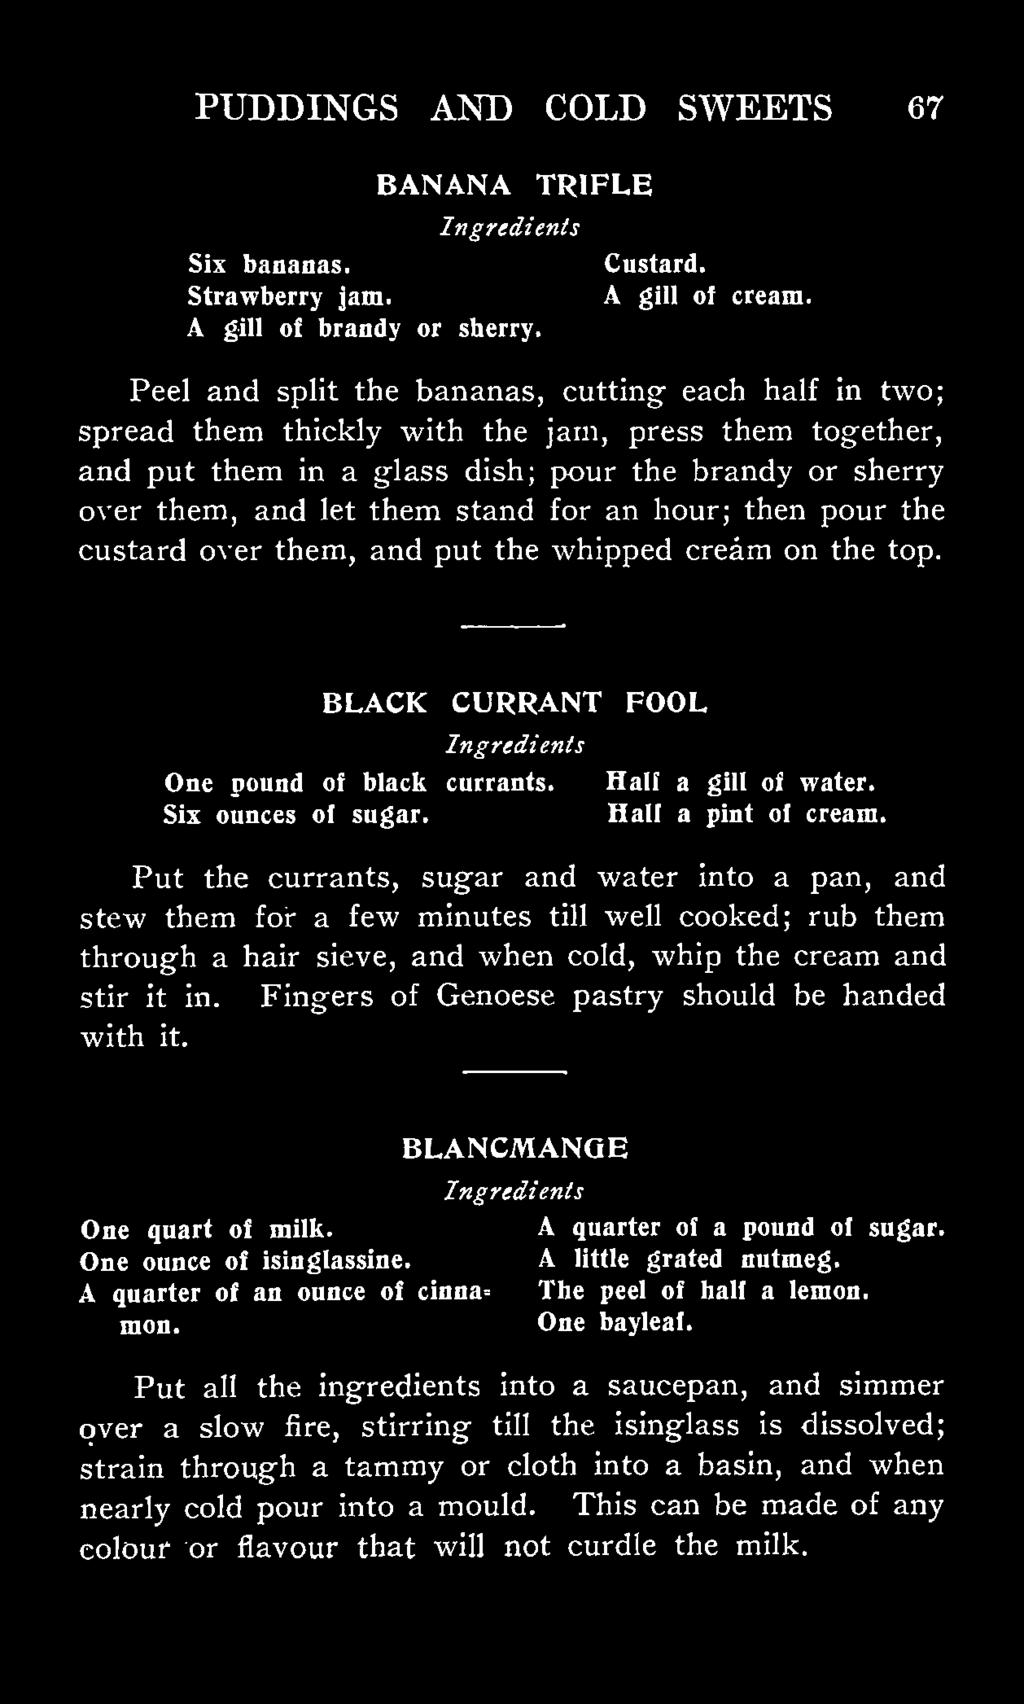 an hour; then pour the custard over them, and put the whipped cream on the top. BLACK CURRANT FOOL One pound of black currants. Half a gill of water. Six ounces of sugar. Half a pint of cream.